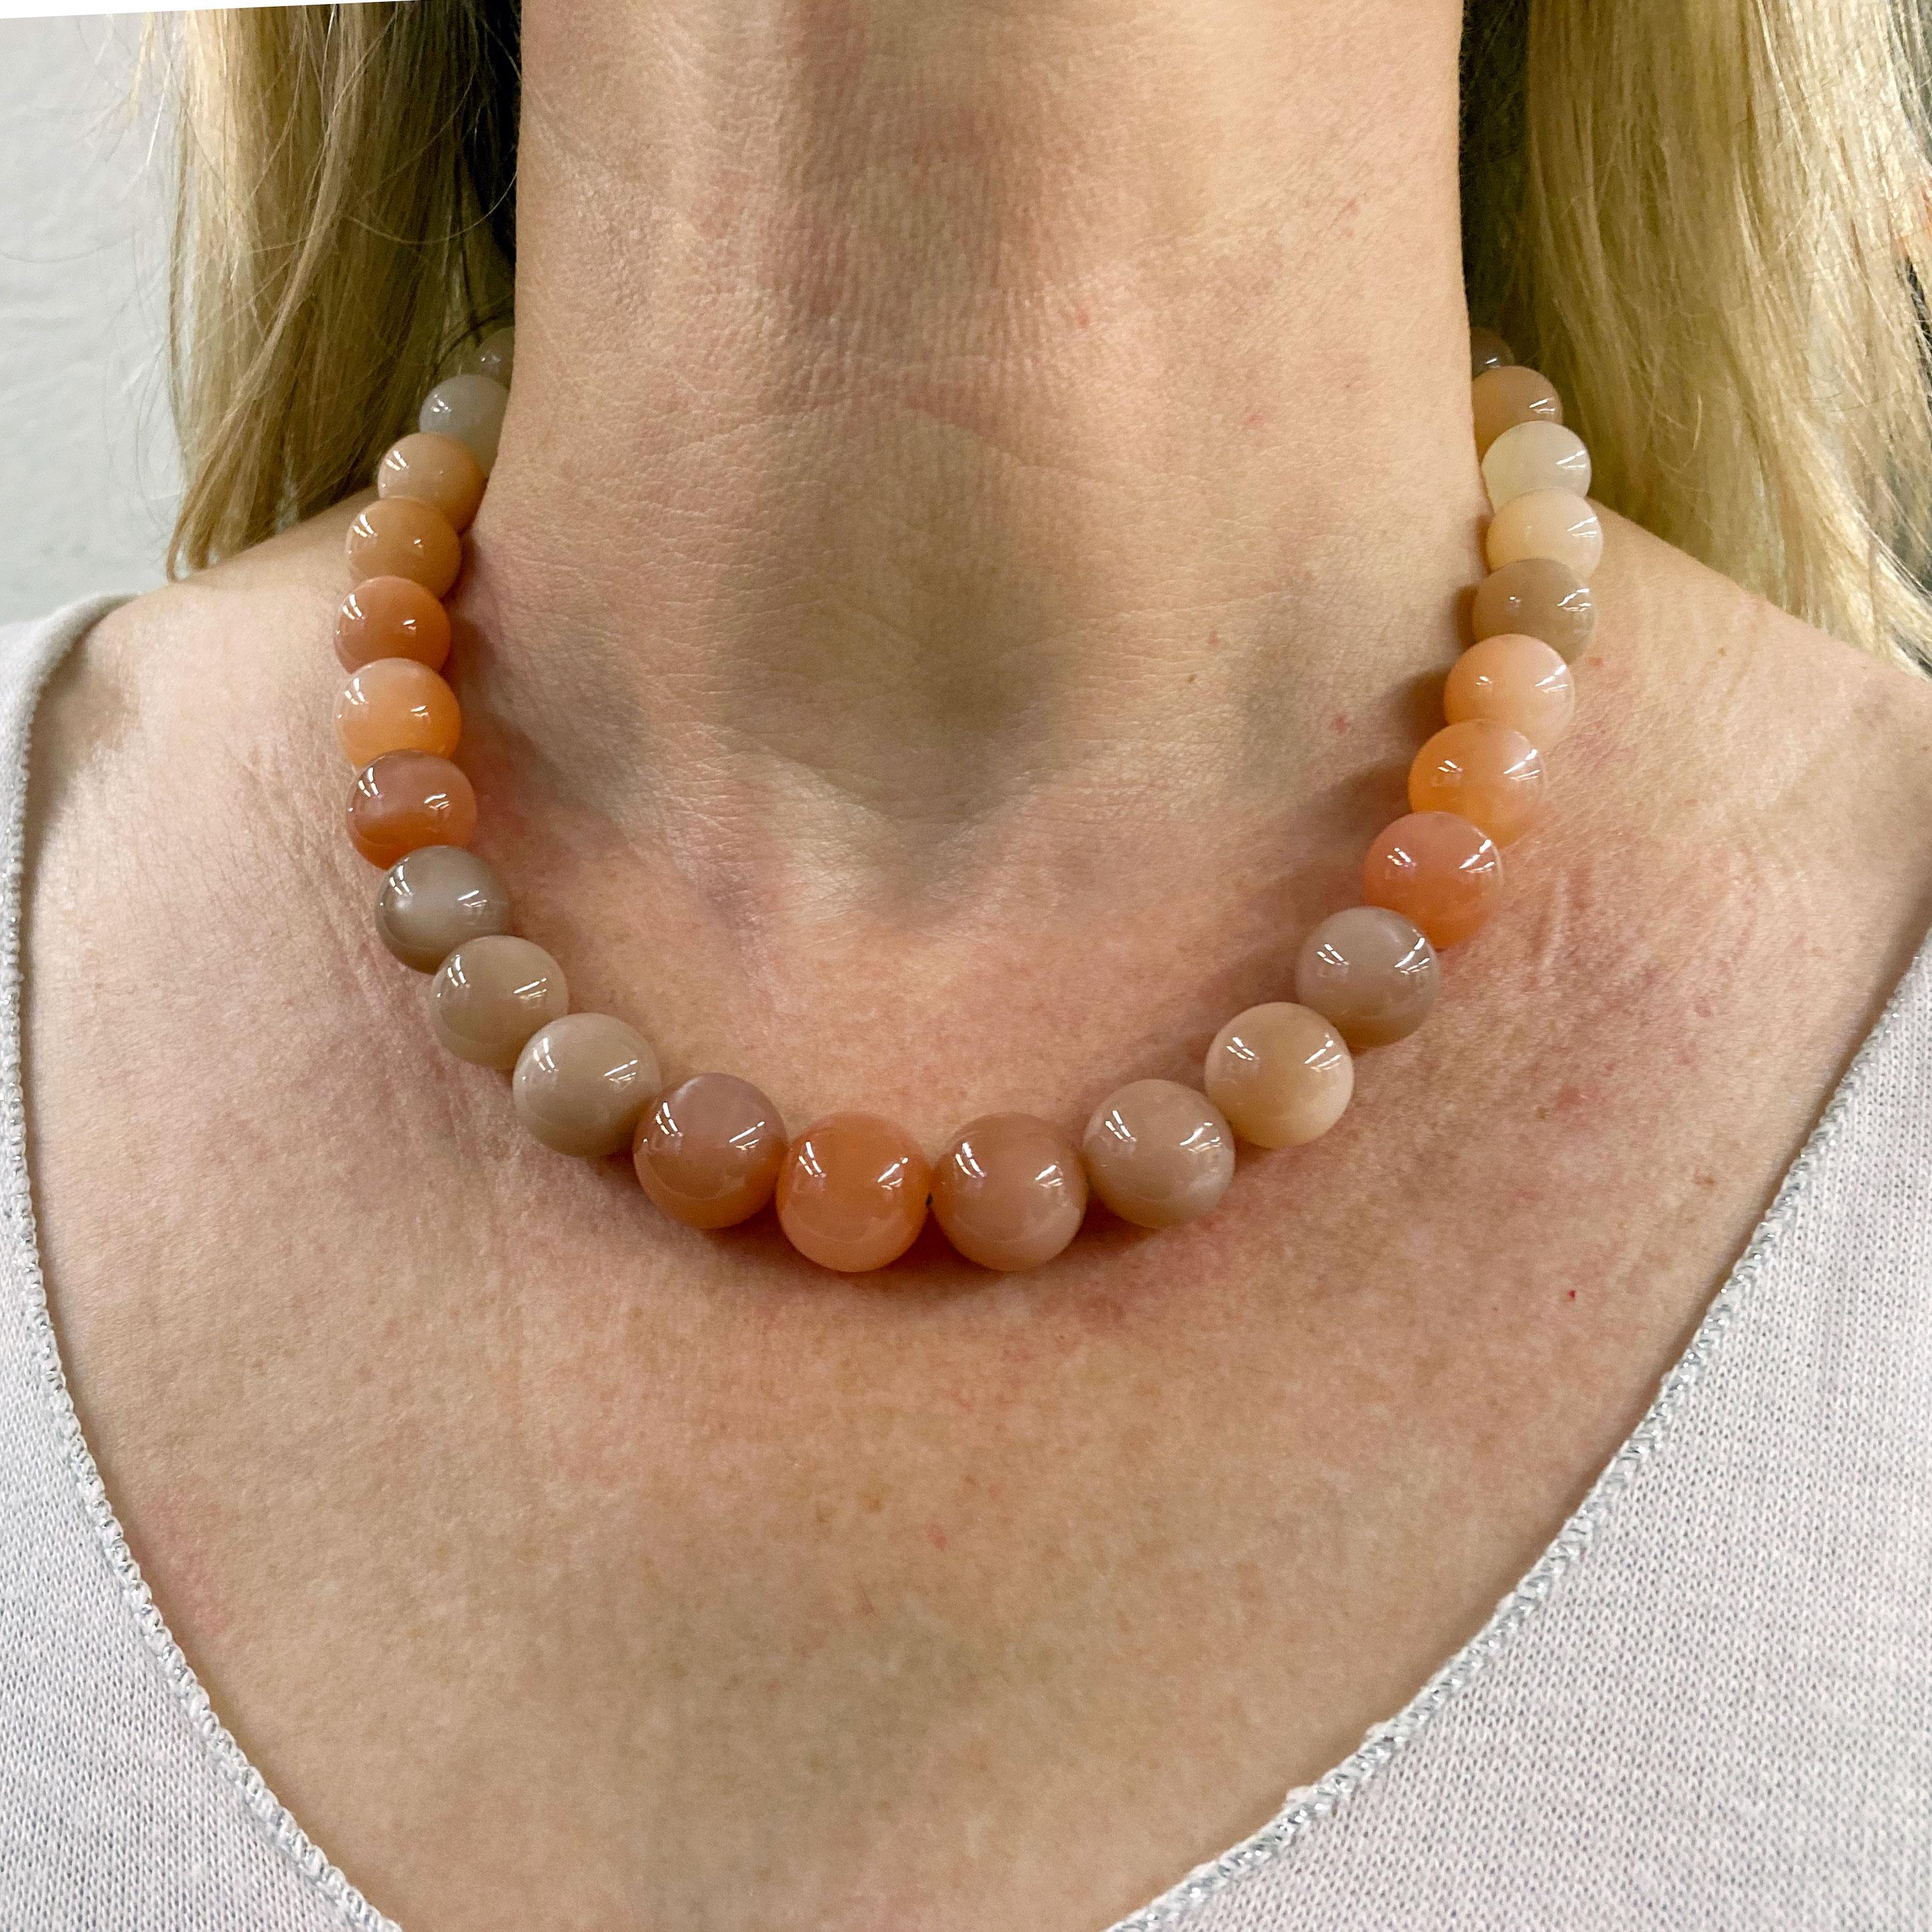 A very elegant and wearable Moonstone necklace with an 18 Karat rose Gold clasp with Pyramid decor. The necklace is slightly graduated ranging from 15.5mm to 10.5mm. The moonstone beads vary in color, all in earthy warm hues. 
Total length: 47 cm. 